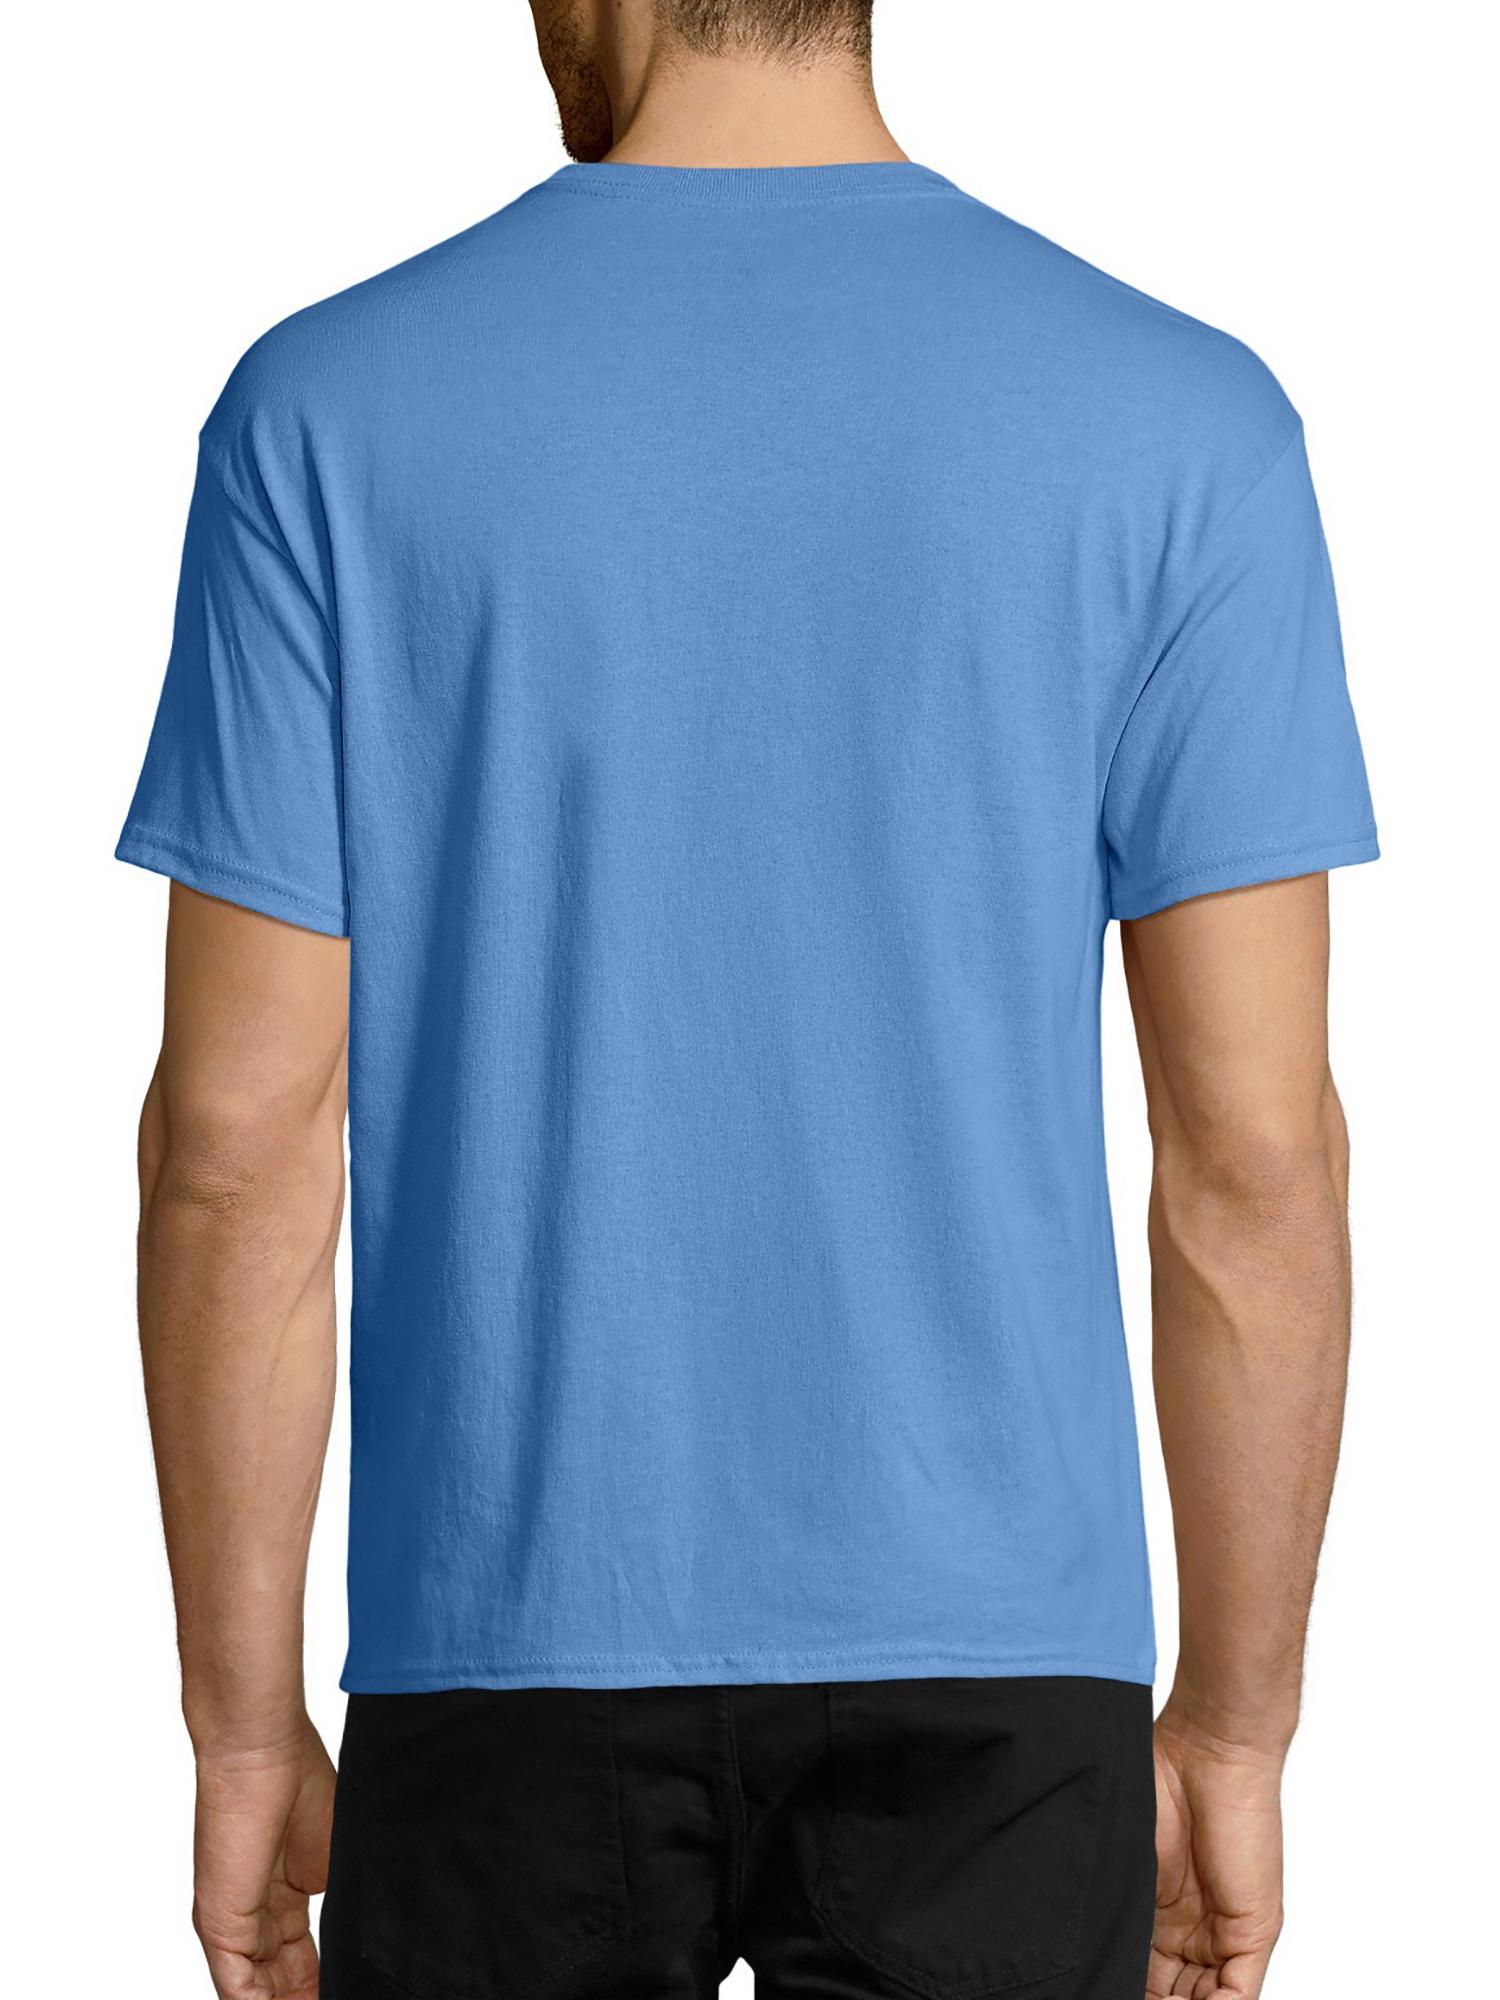 Hanes Men's and Big Men's Ecosmart Short Sleeve Tee, Up To Size 3XL - image 2 of 4